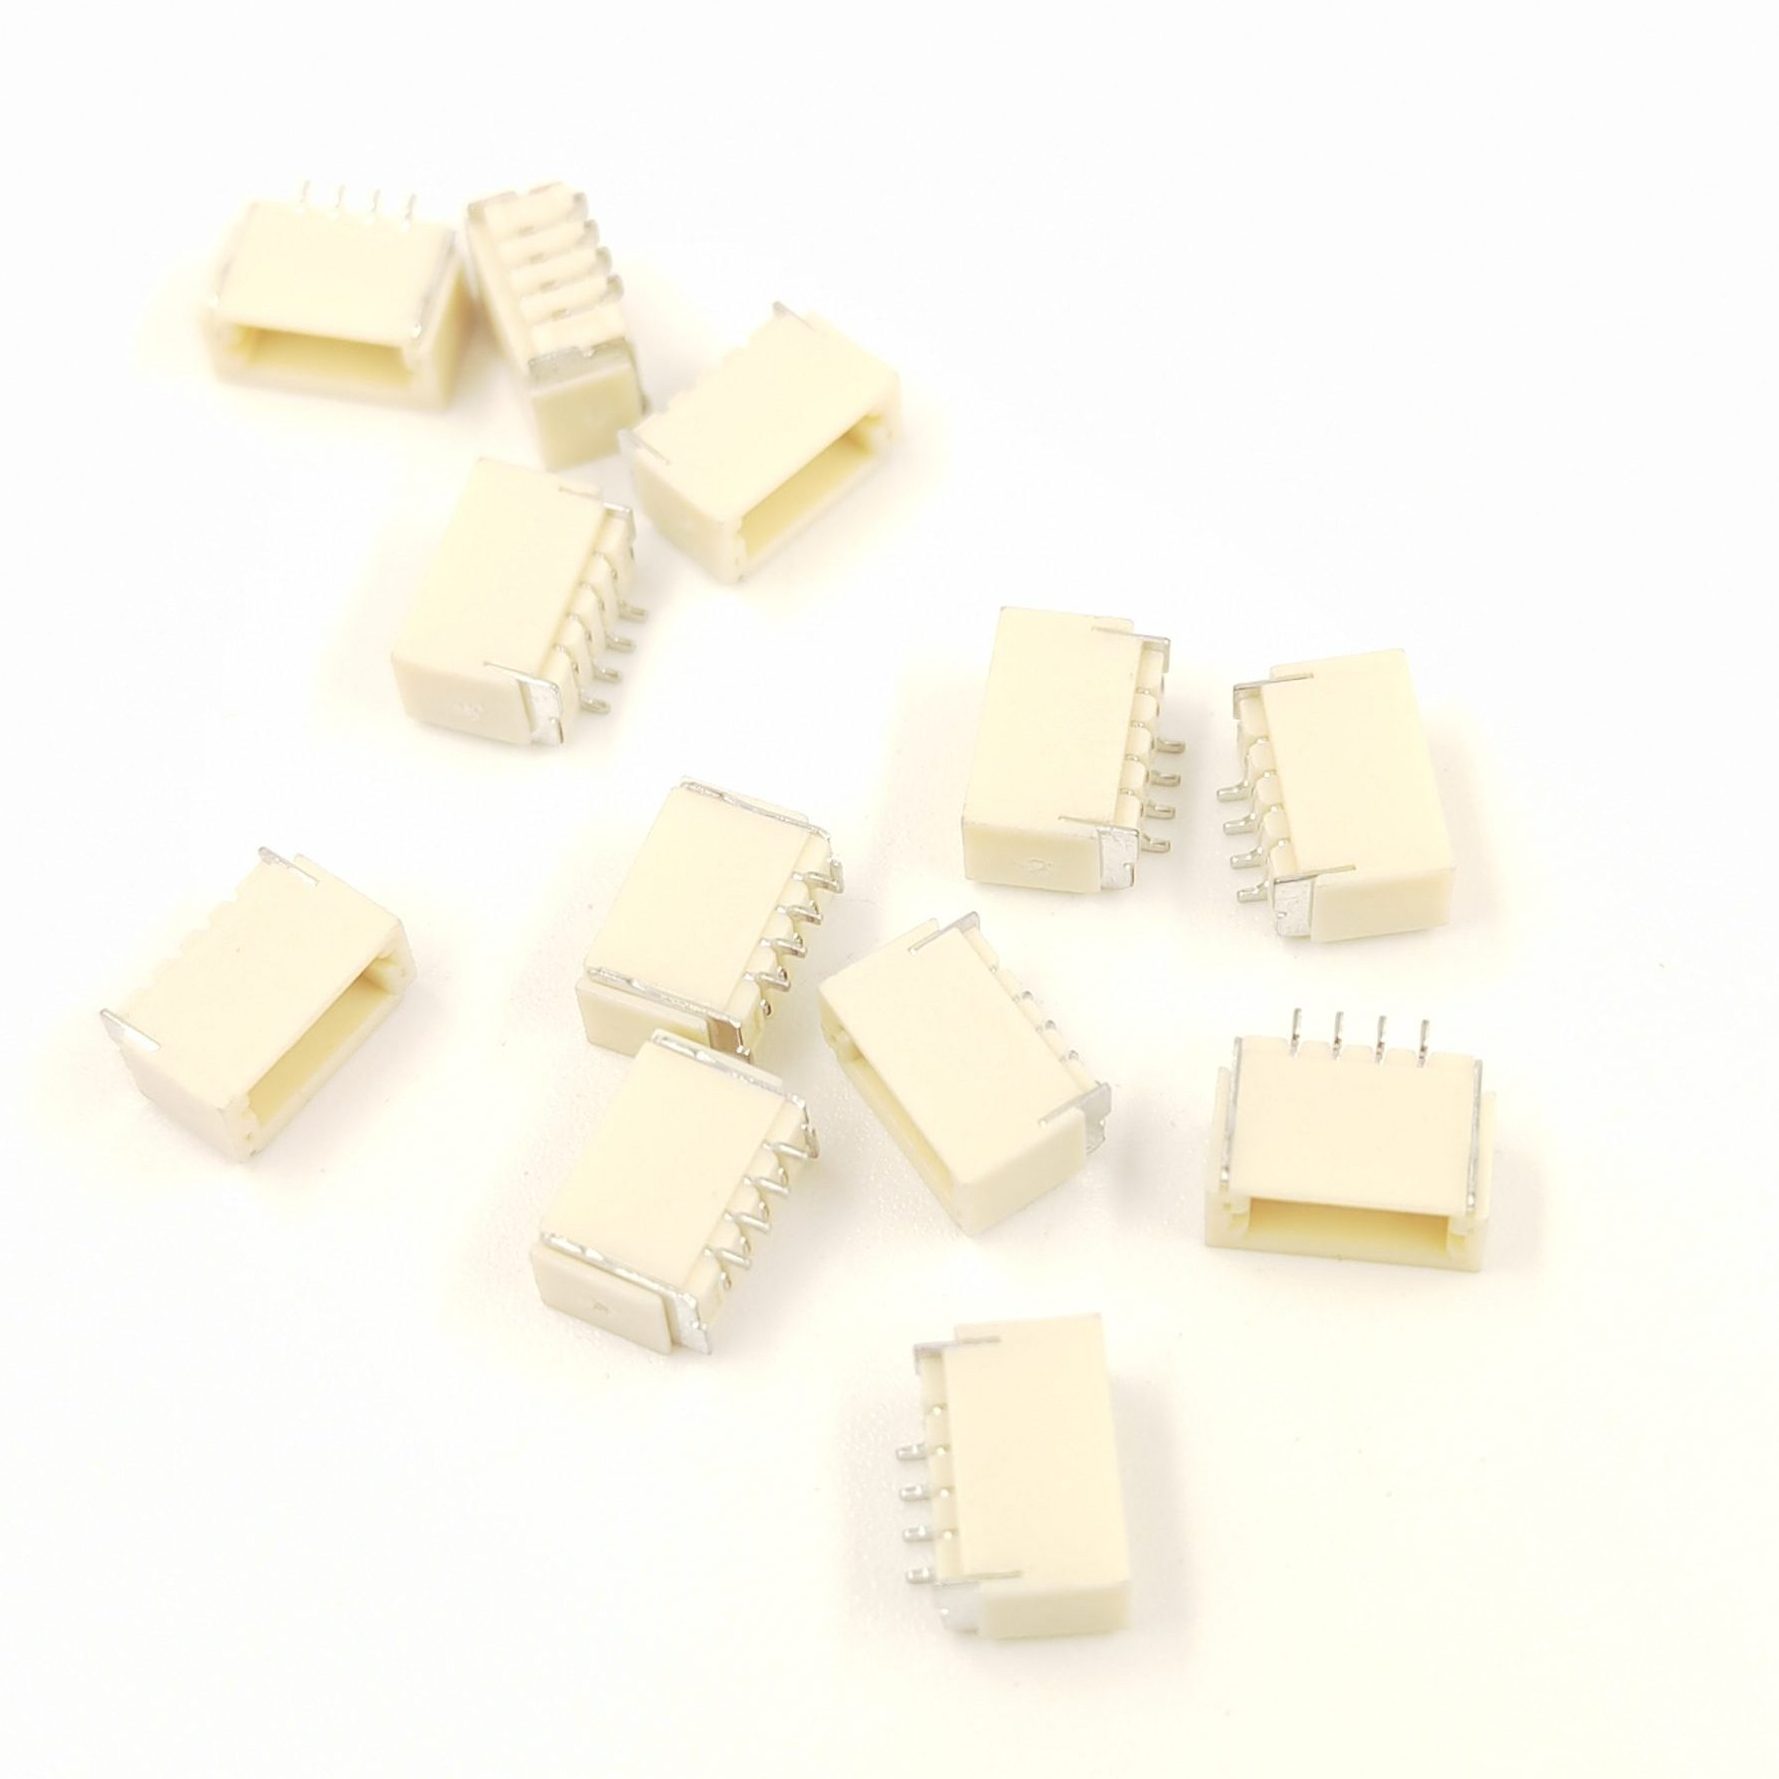 Connectors for wire-to-board applications ensure reliable connections between wires and circuit boards, enhancing performance in diverse electronic applications.